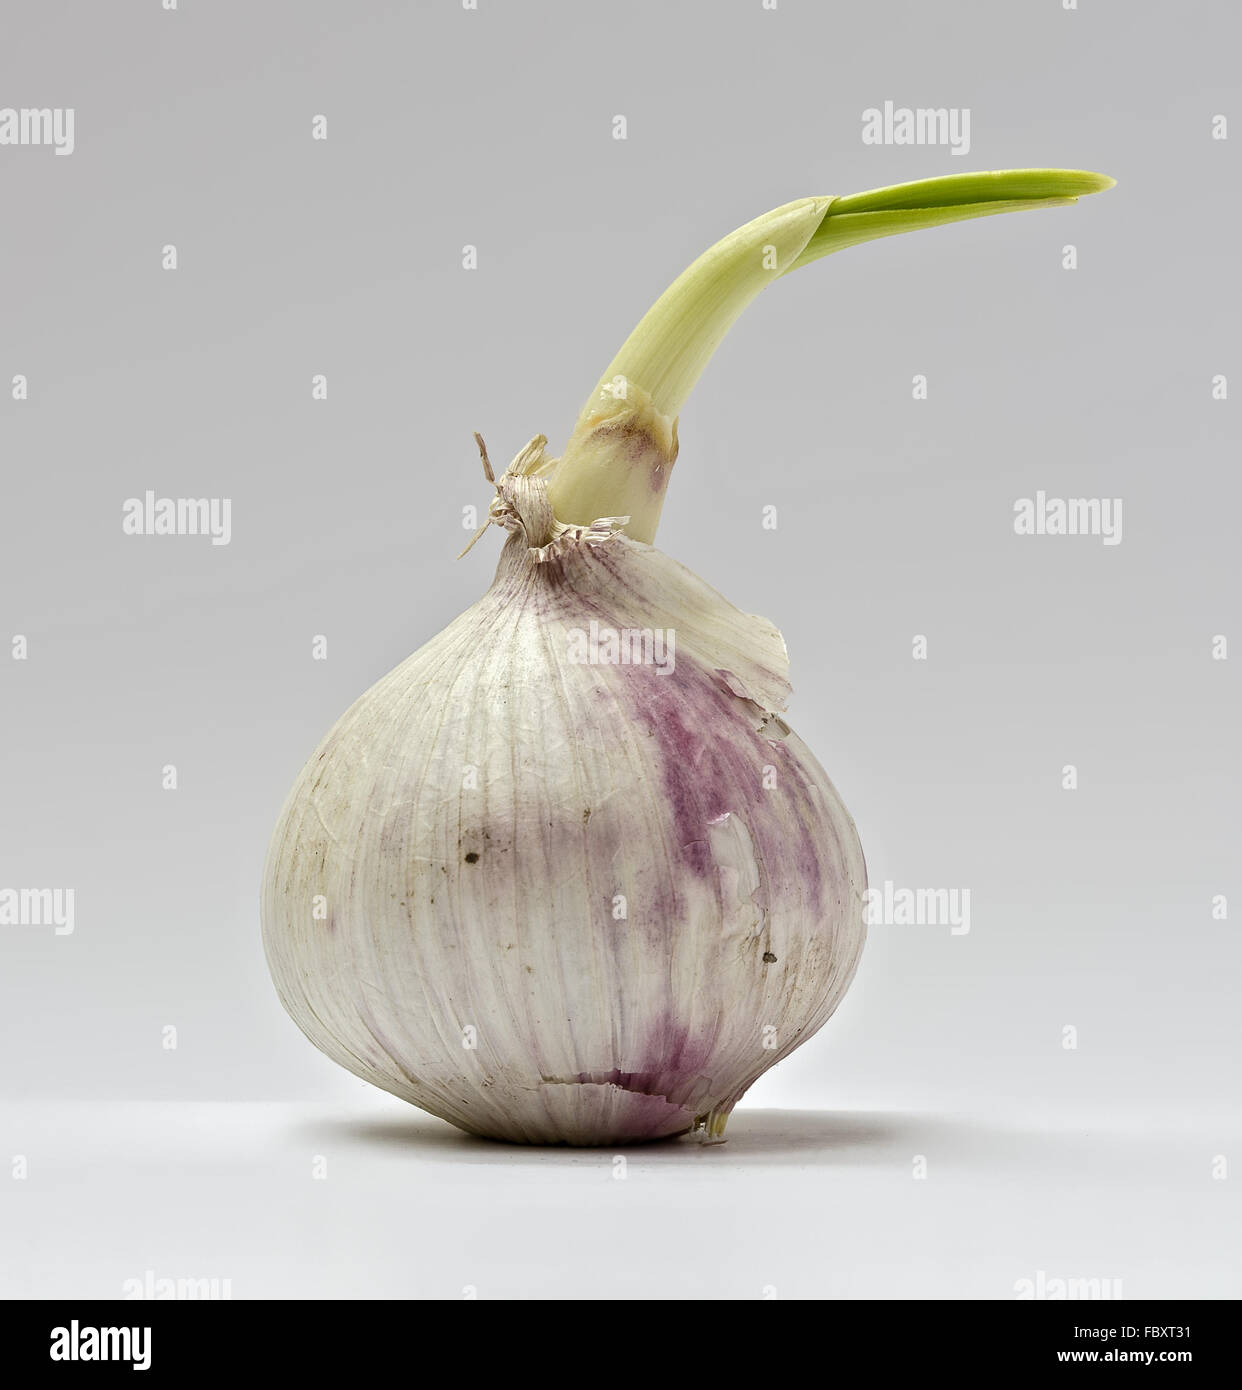 chinese garlic with green germinal sprout Stock Photo